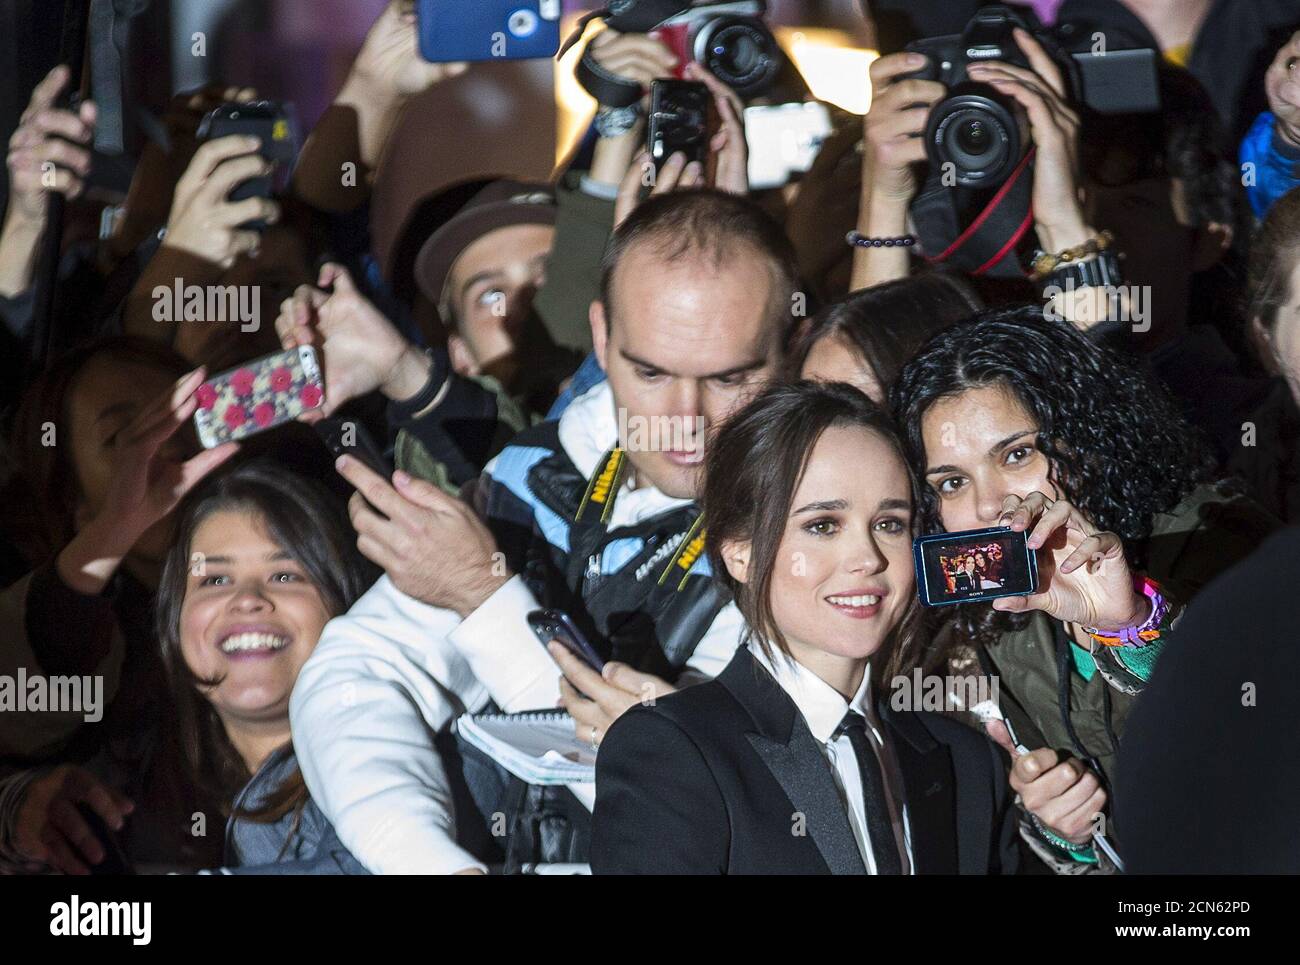 Actress Ellen Page arrives as she poses with fans on the red carpet for the film 'Freeheld' during the 40th Toronto International Film Festival in Toronto, Canada, September 13, 2015. TIFF runs from September 10-20.   REUTERS/Mark Blinch Stock Photo